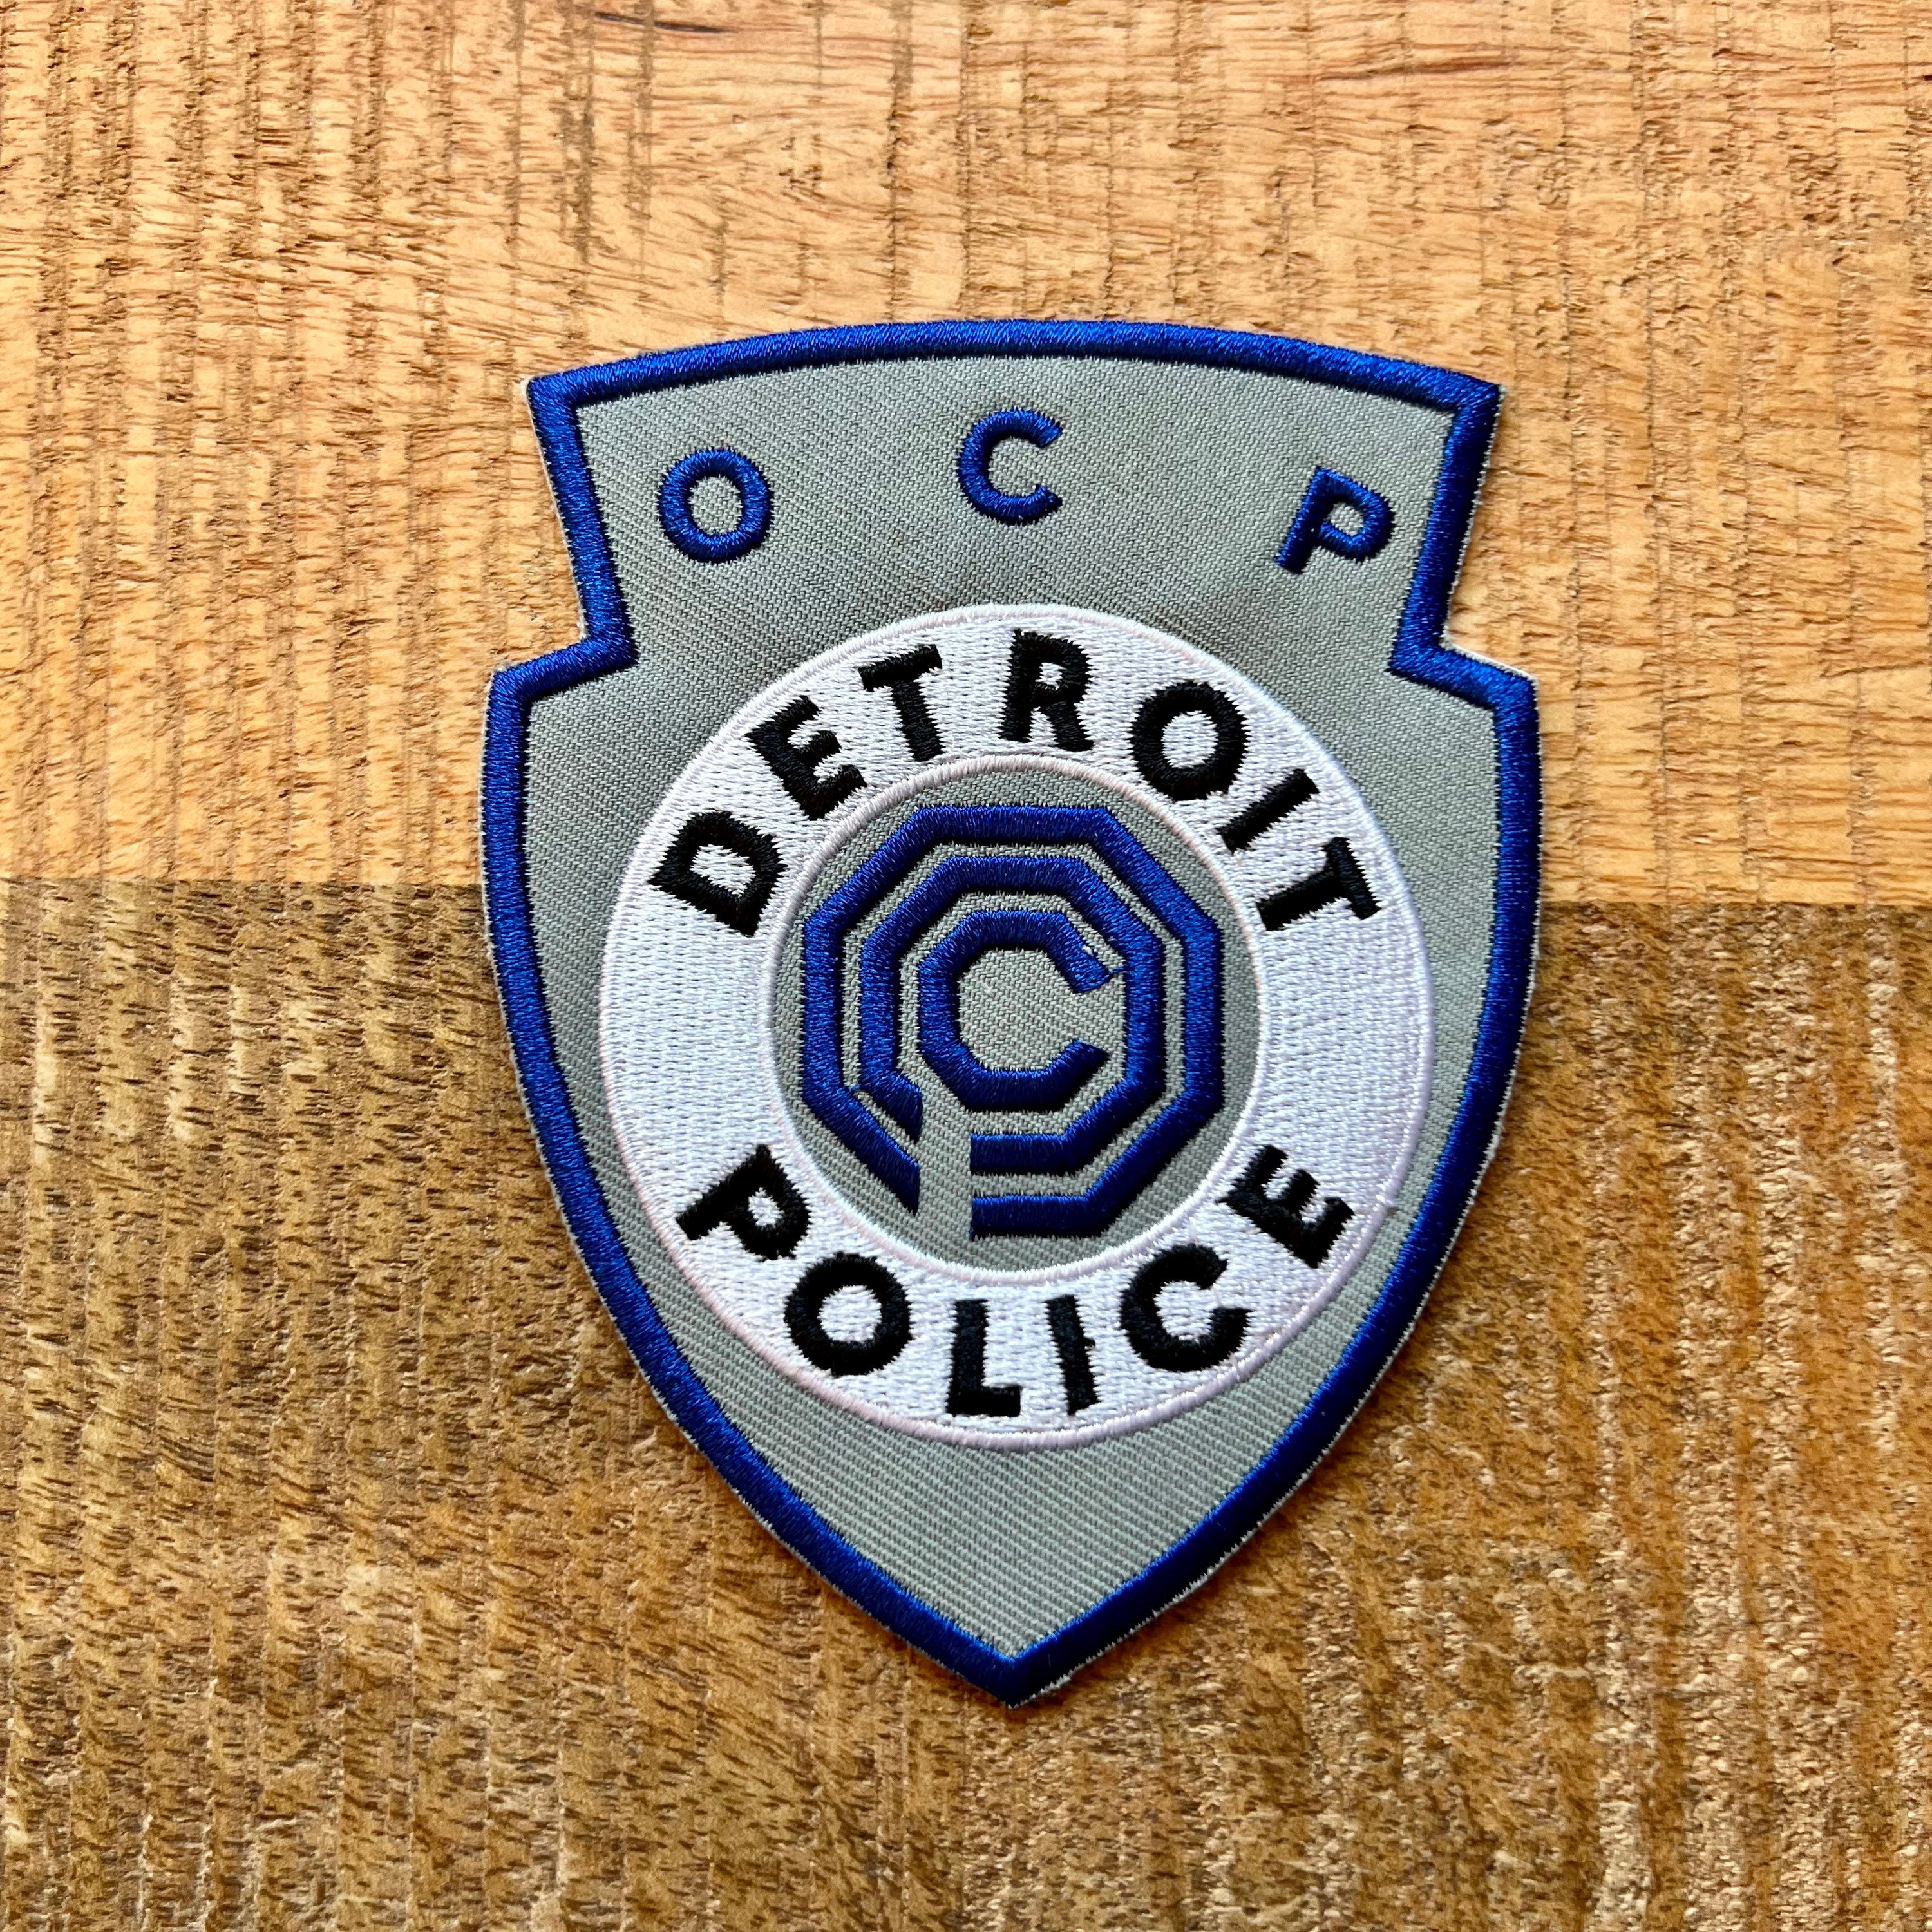 The Truman Show Police Patch